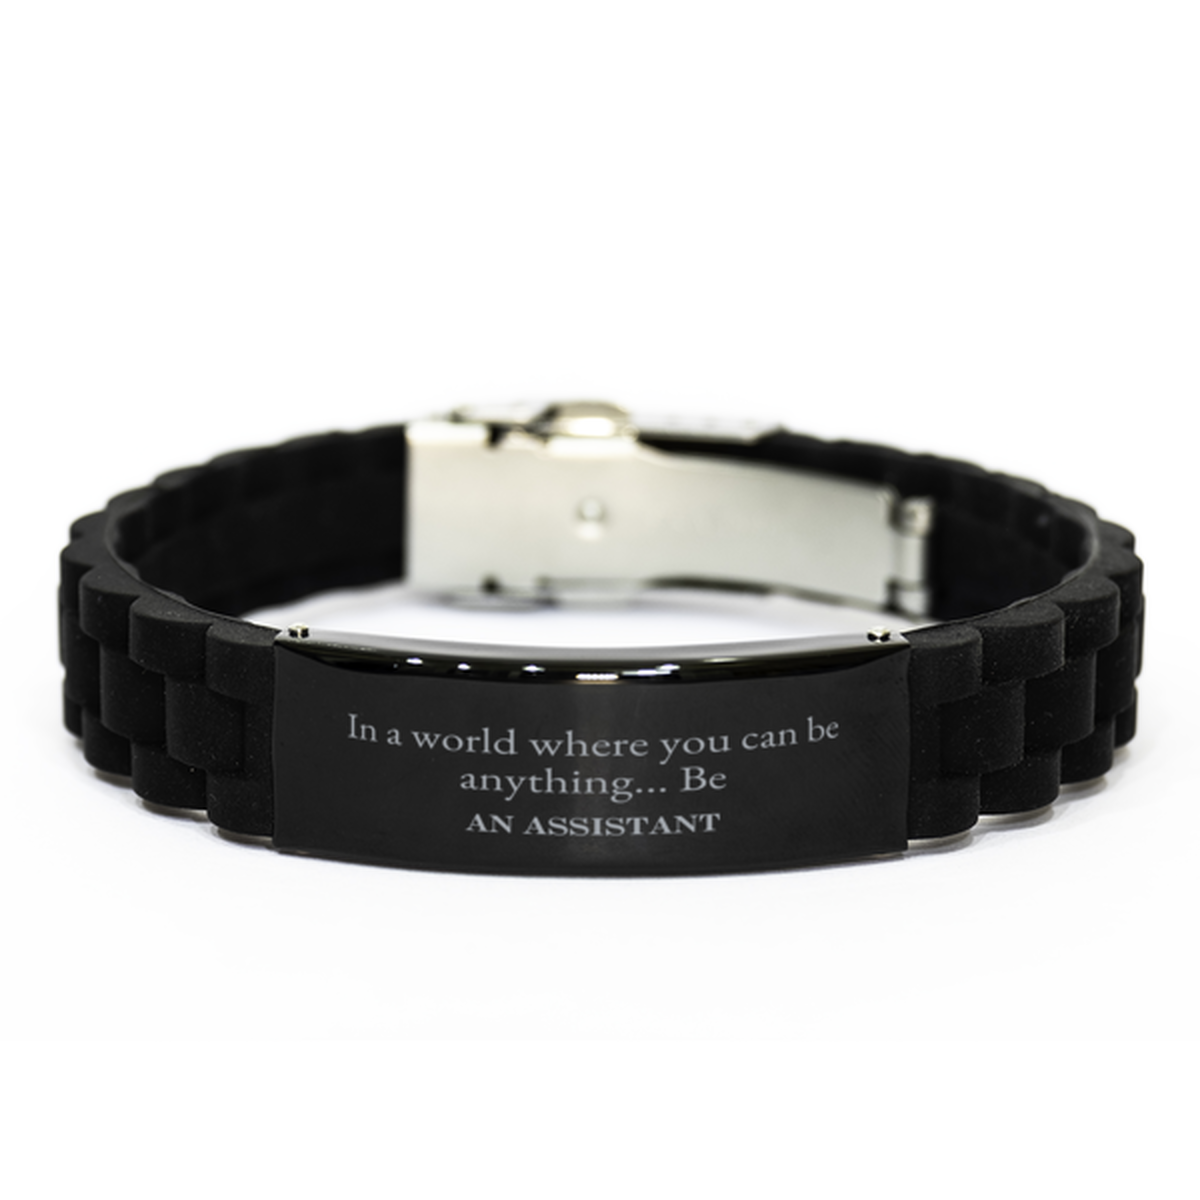 Gifts for Assistant, In a world where you can be anything, Appreciation Birthday Black Glidelock Clasp Bracelet for Men, Women, Friends, Coworkers